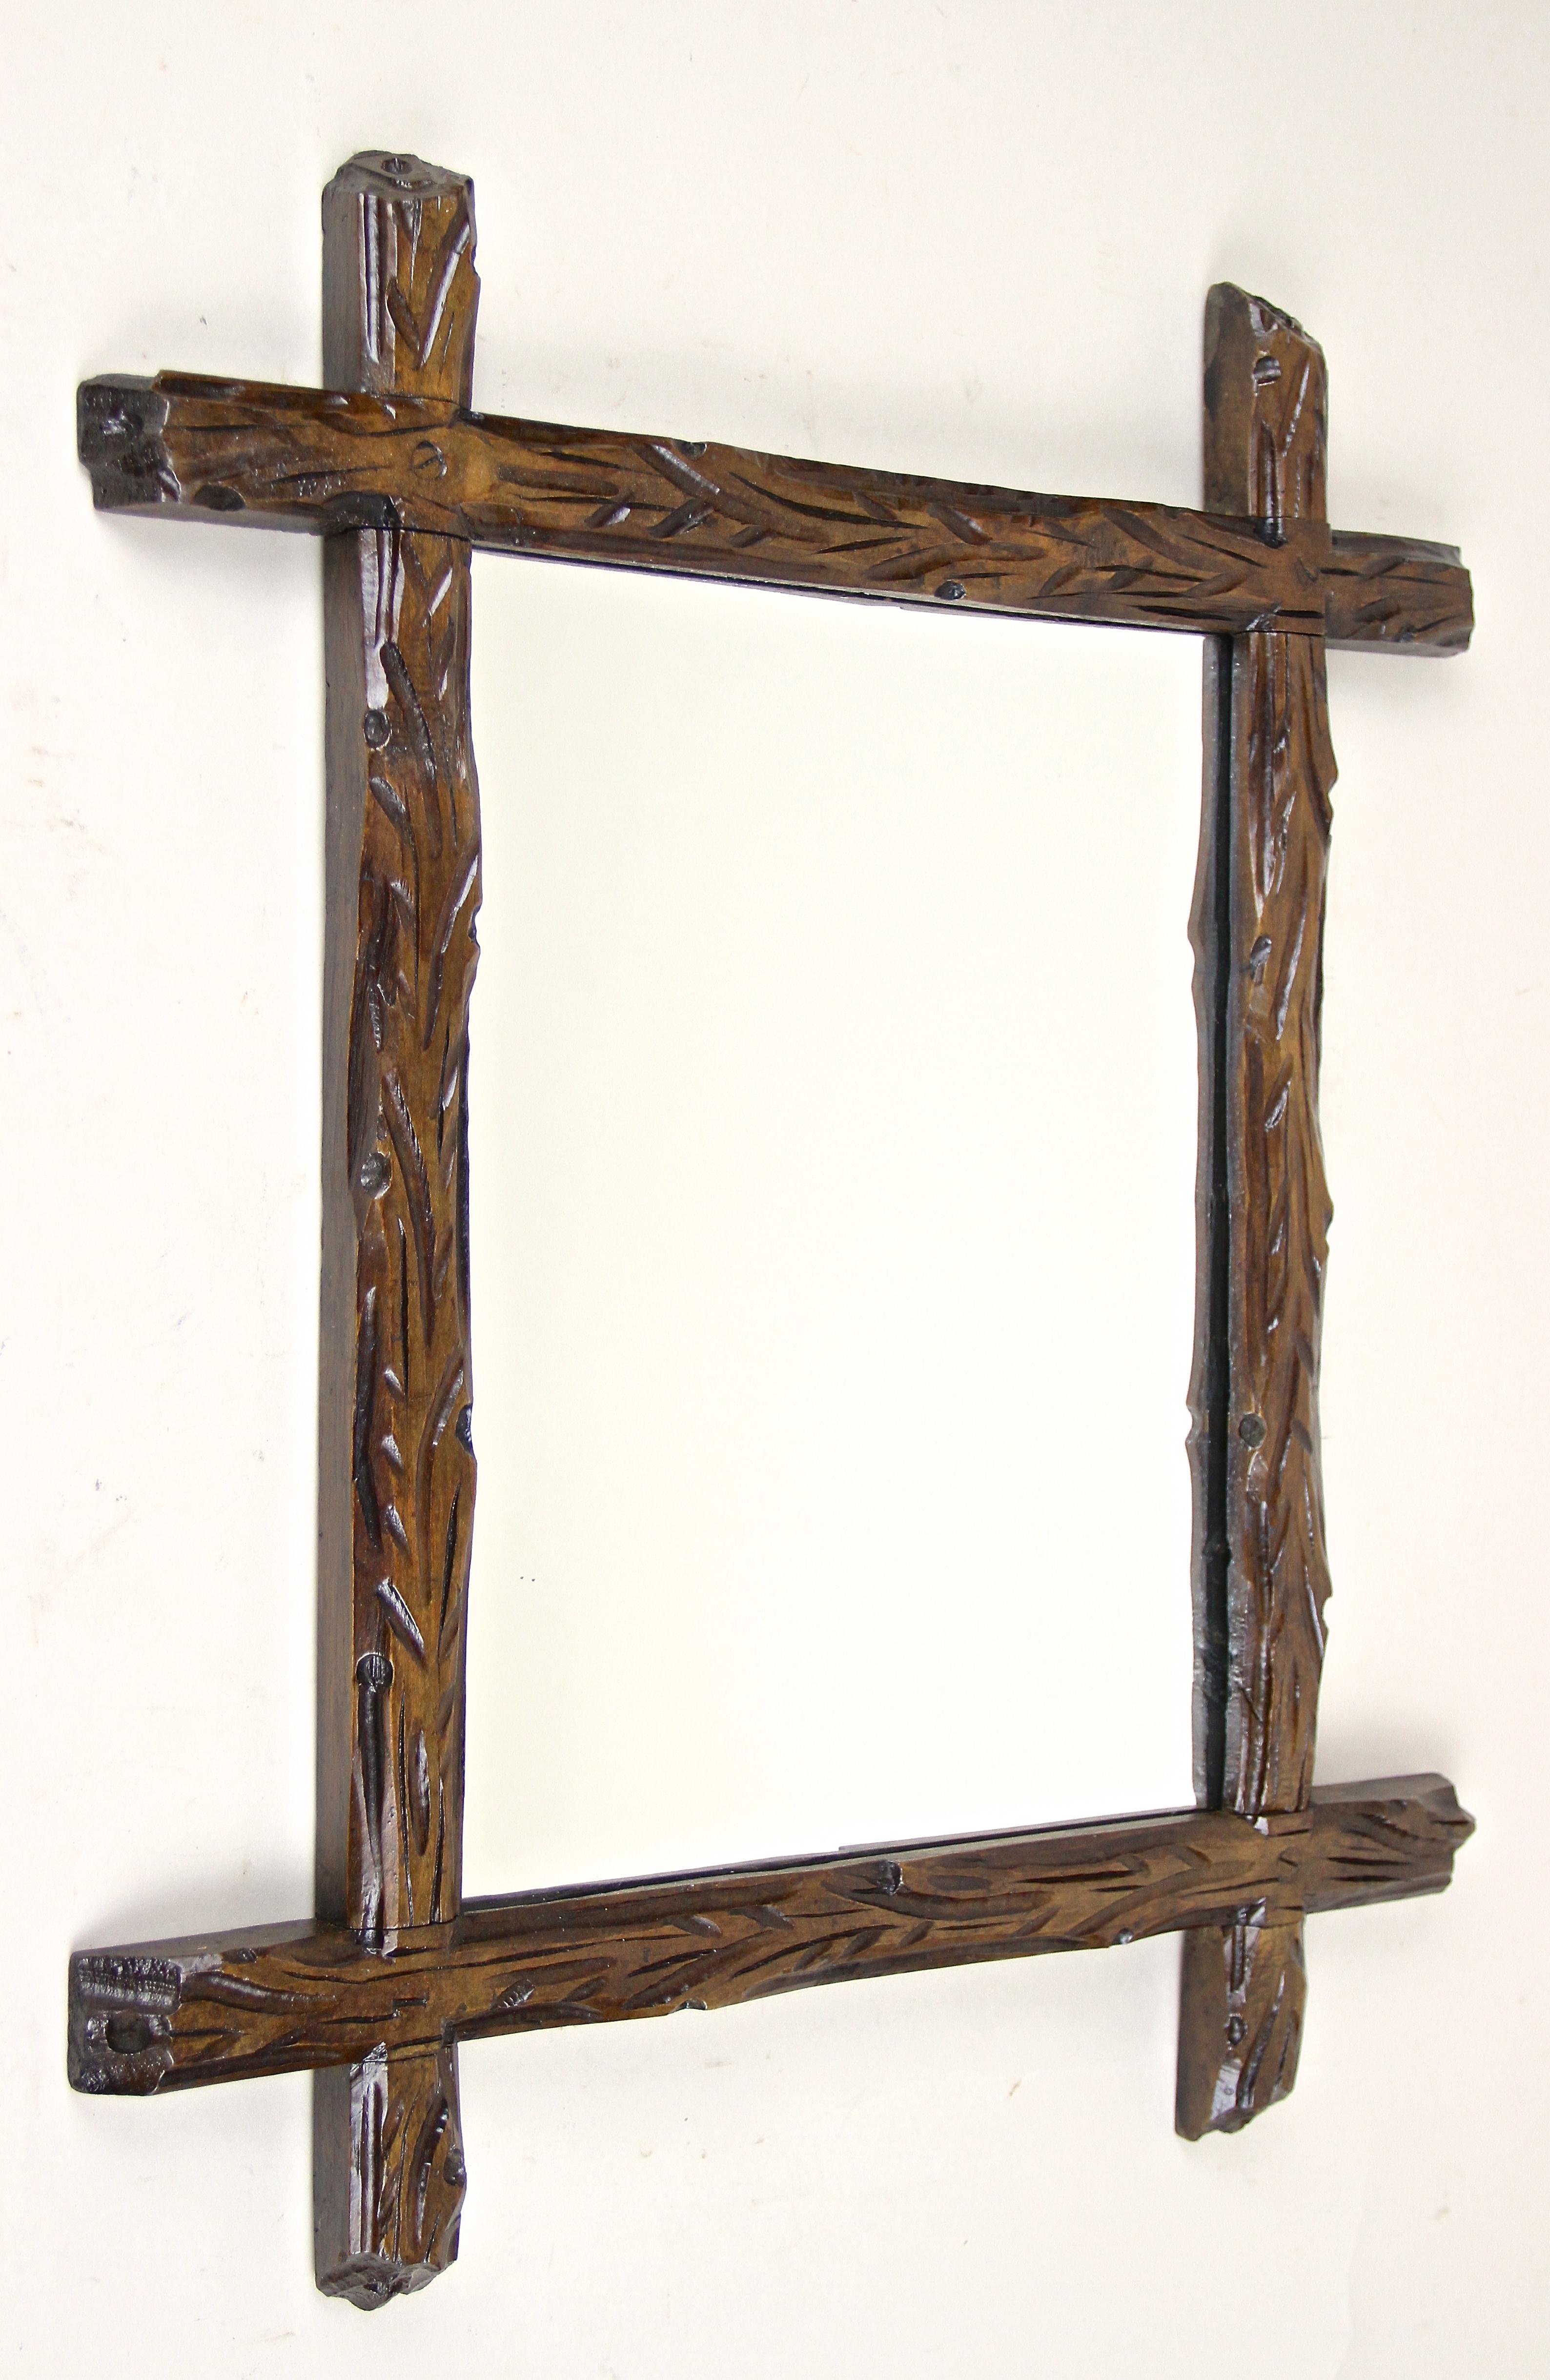 From Austria around 1880 comes this unusual rustic small Black Forest mirror, impressing with its extraordinary old tree trunks design. The artfully hand carved basswood frame with protruding corners conveys a fantastic 